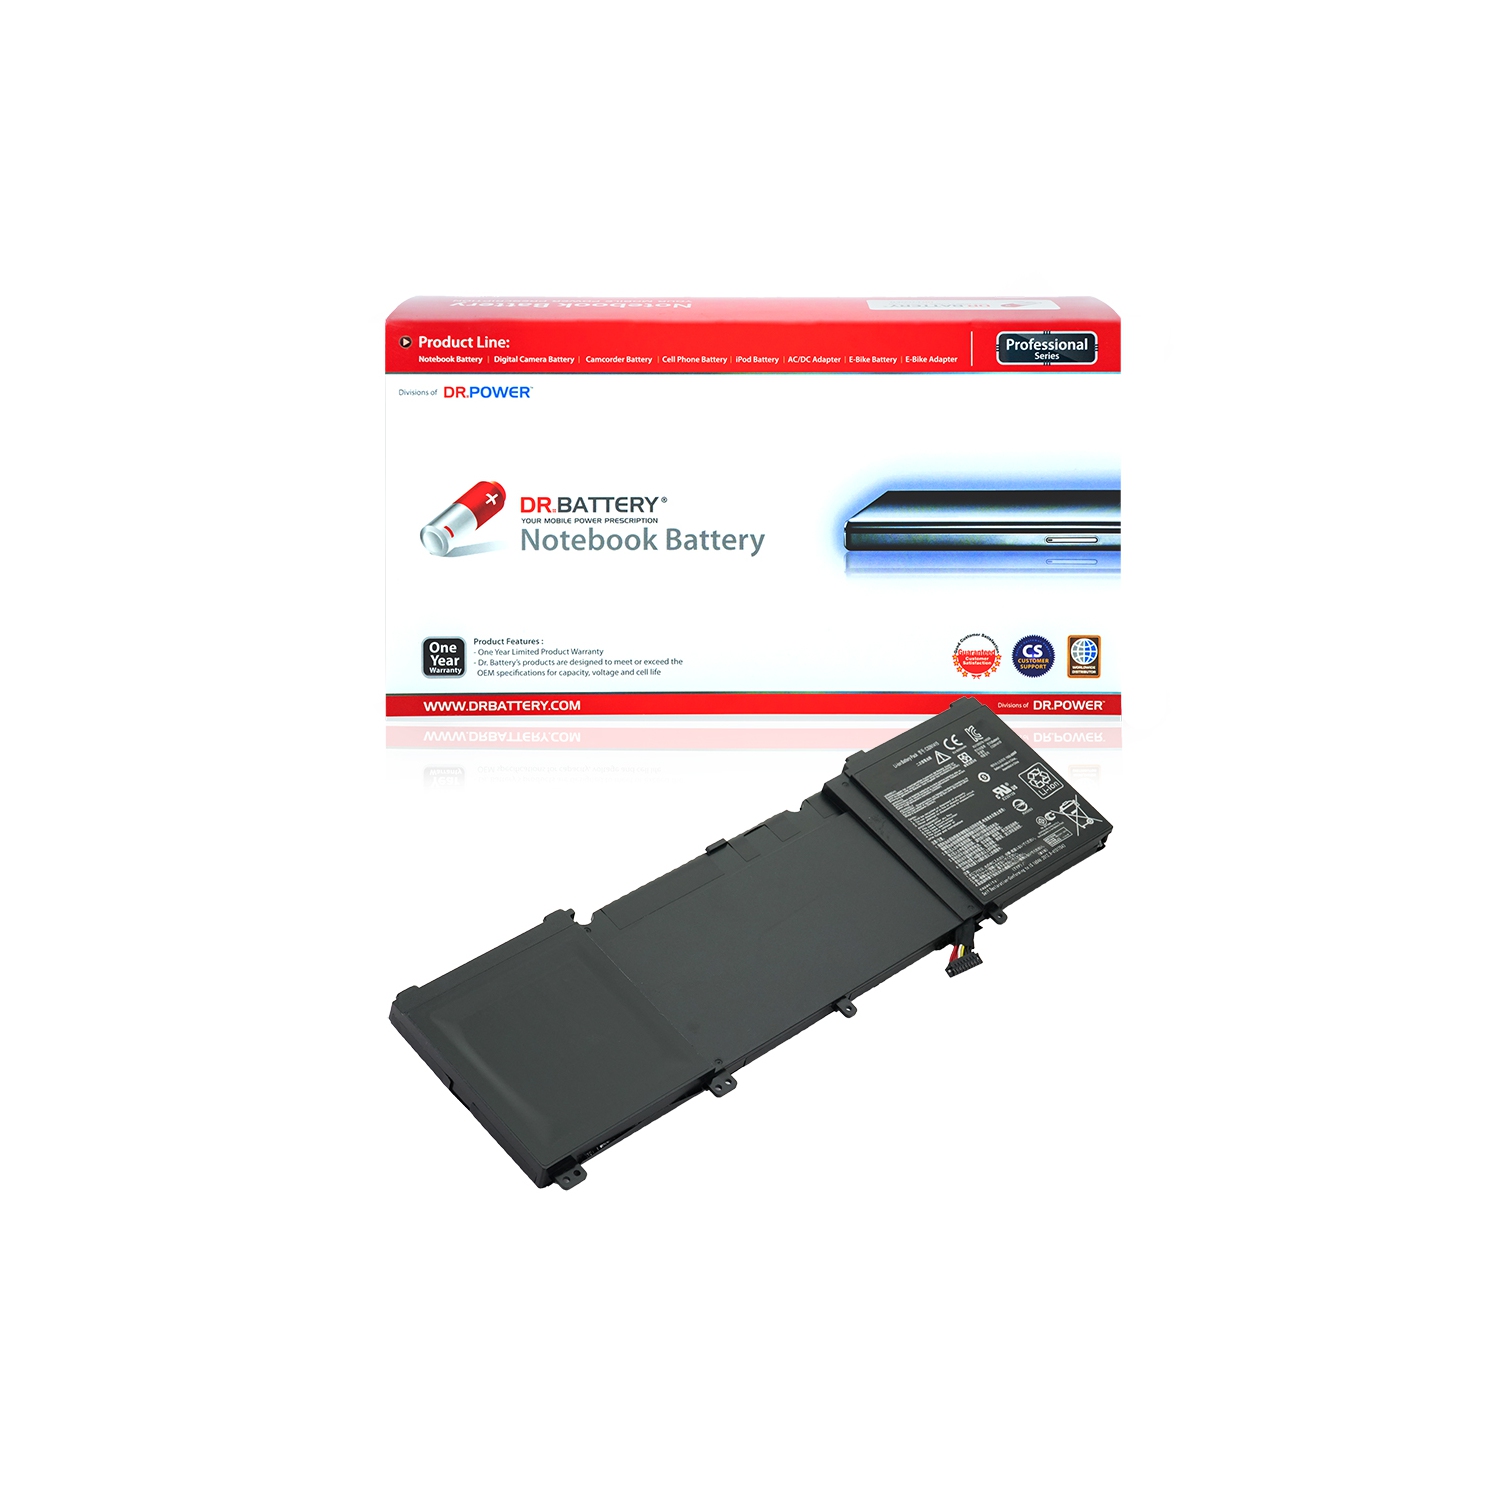 DR. BATTERY - Replacement for Asus ZenBook Pro UX501J / UX501JW / UX501JW4720 / UX501L / UX501LW / 0B200-01250000 / C32N1415 [11.4V / 8422mAh / 96Wh] ***Free Shipping***